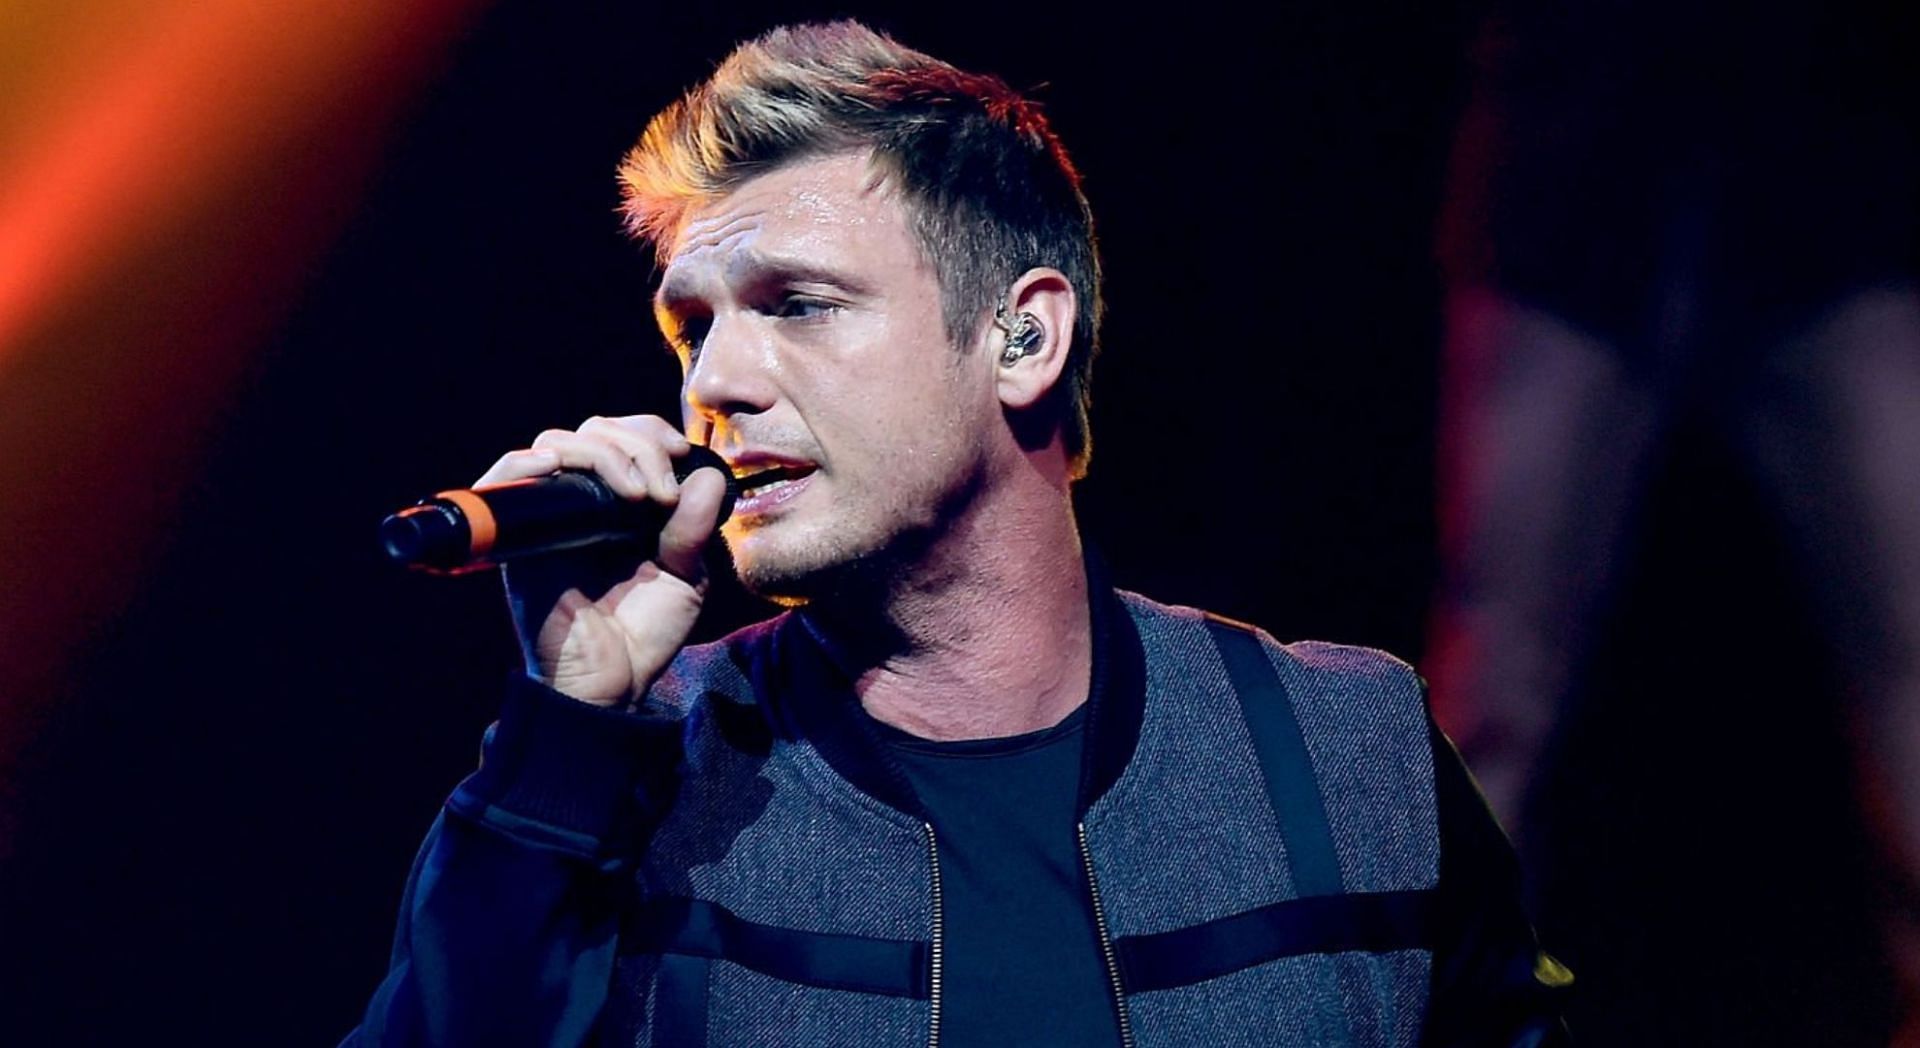 Nick Carter is facing a lawsuit on accusations of allegedly assaulting a teen in 2001 (Image via Getty Images)